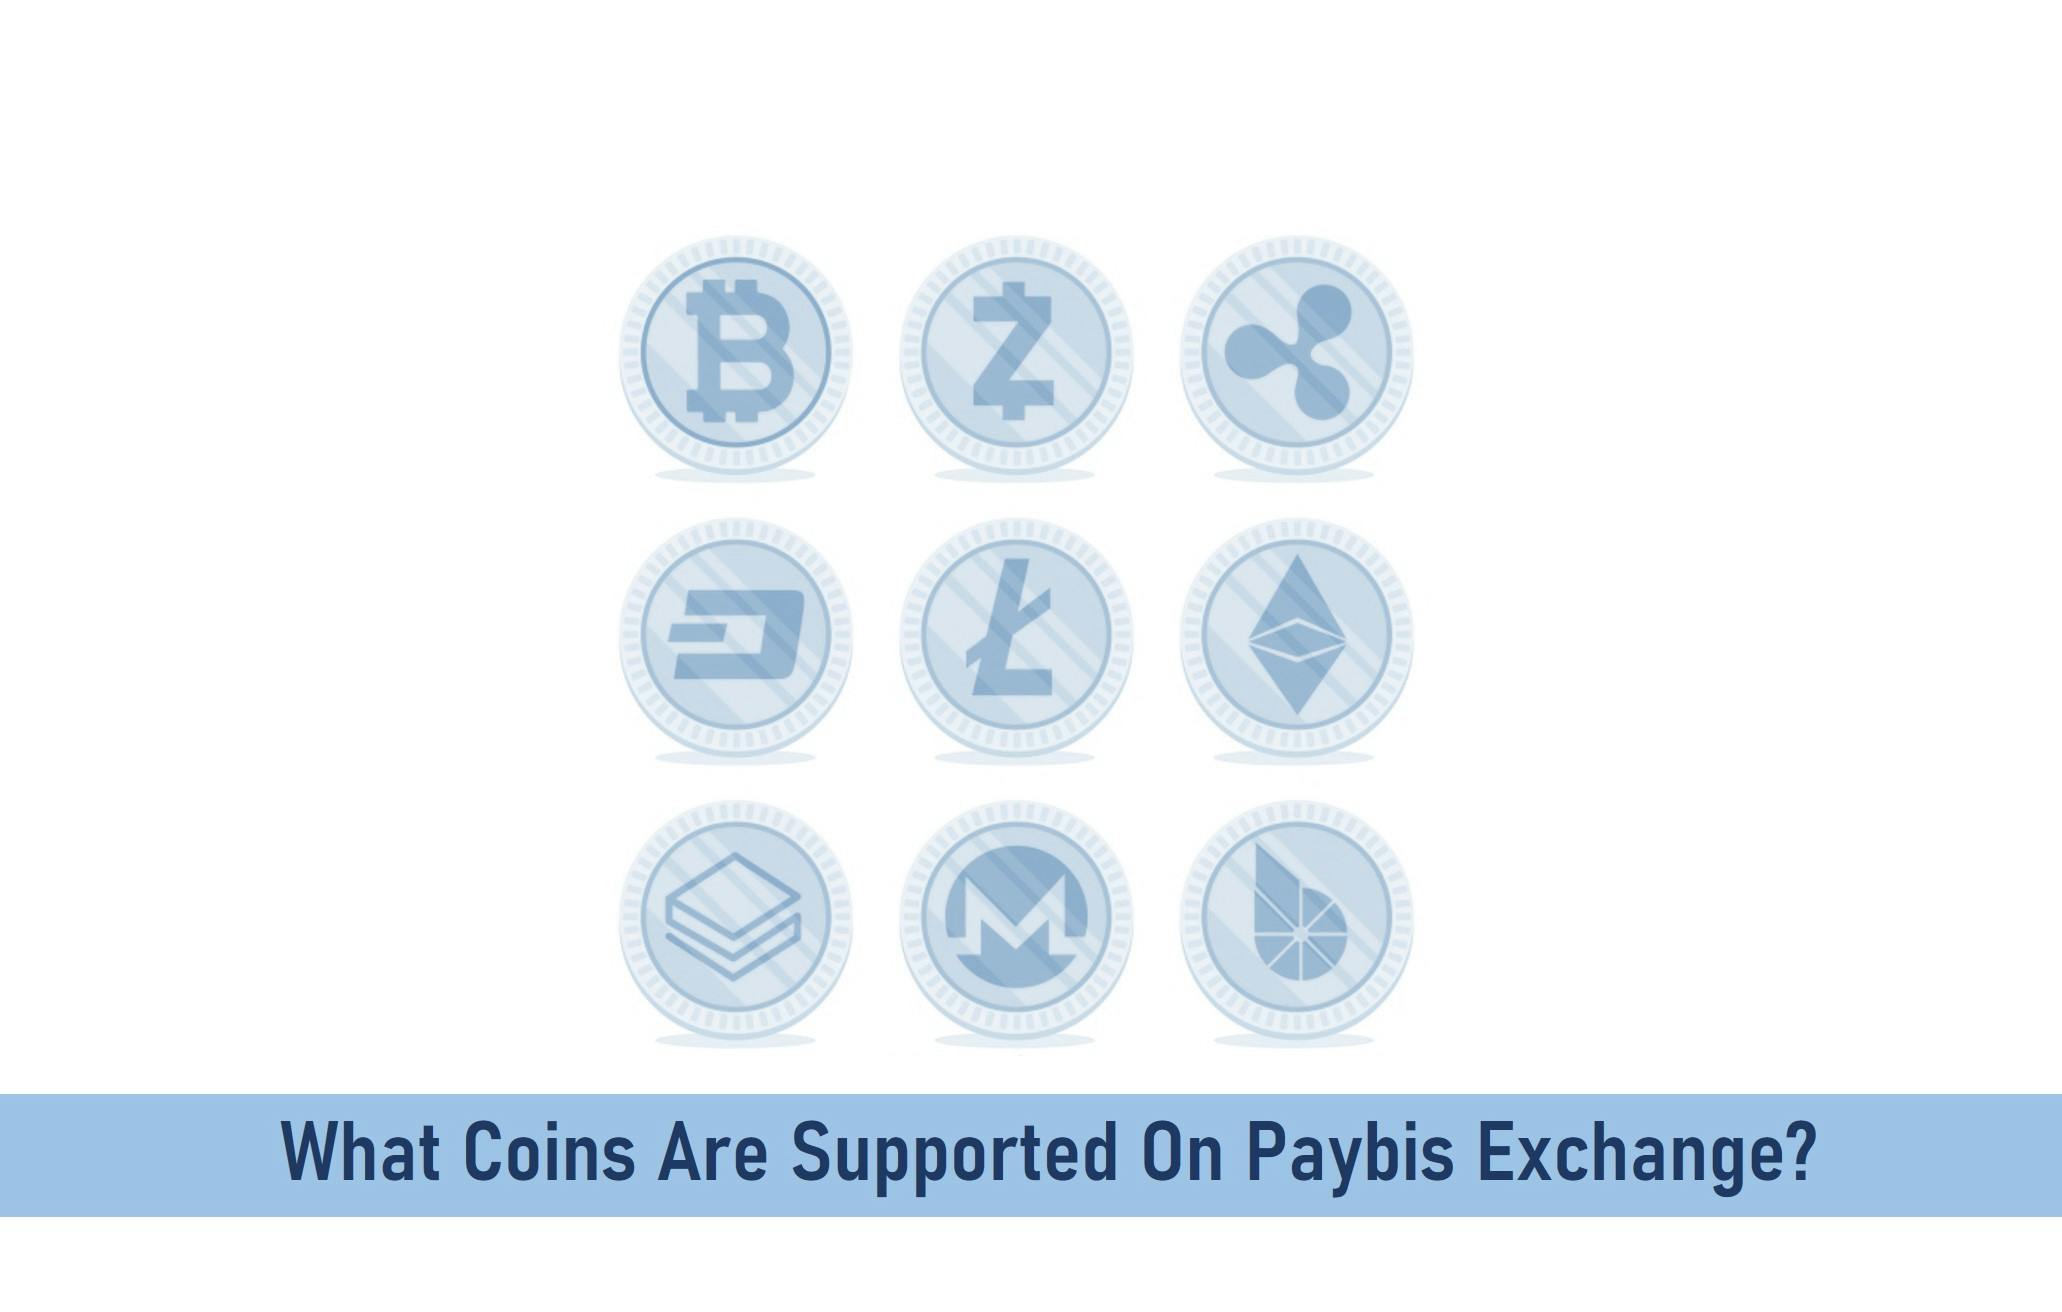 What Coins Are Supported On Paybis Exchange?